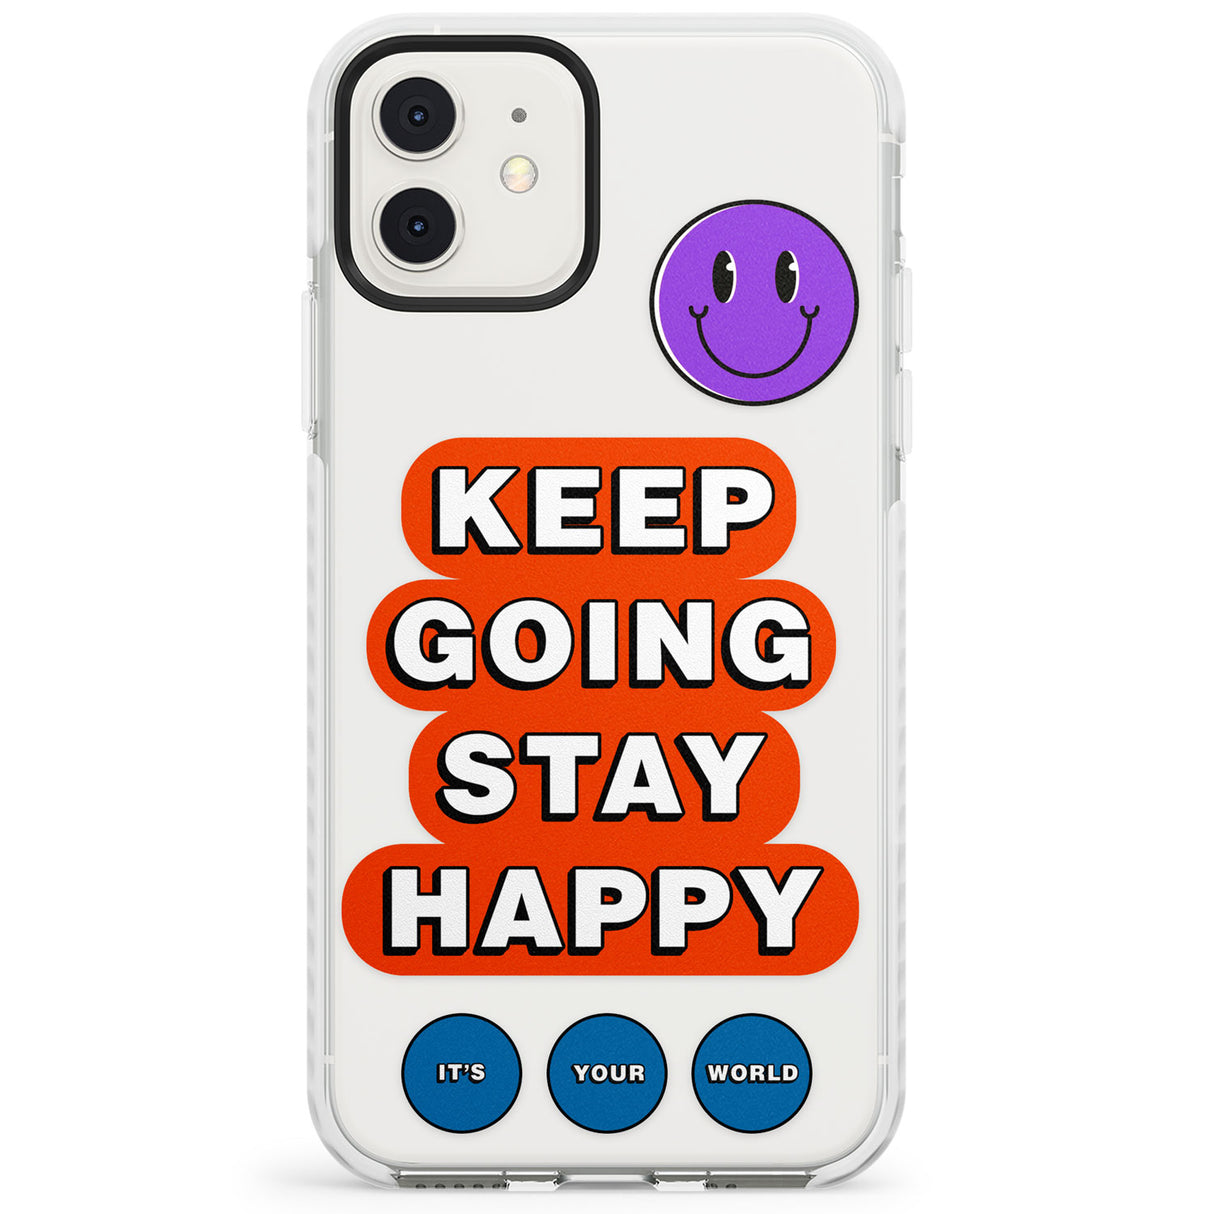 Keep Going Stay Happy Impact Phone Case for iPhone 11, iphone 12